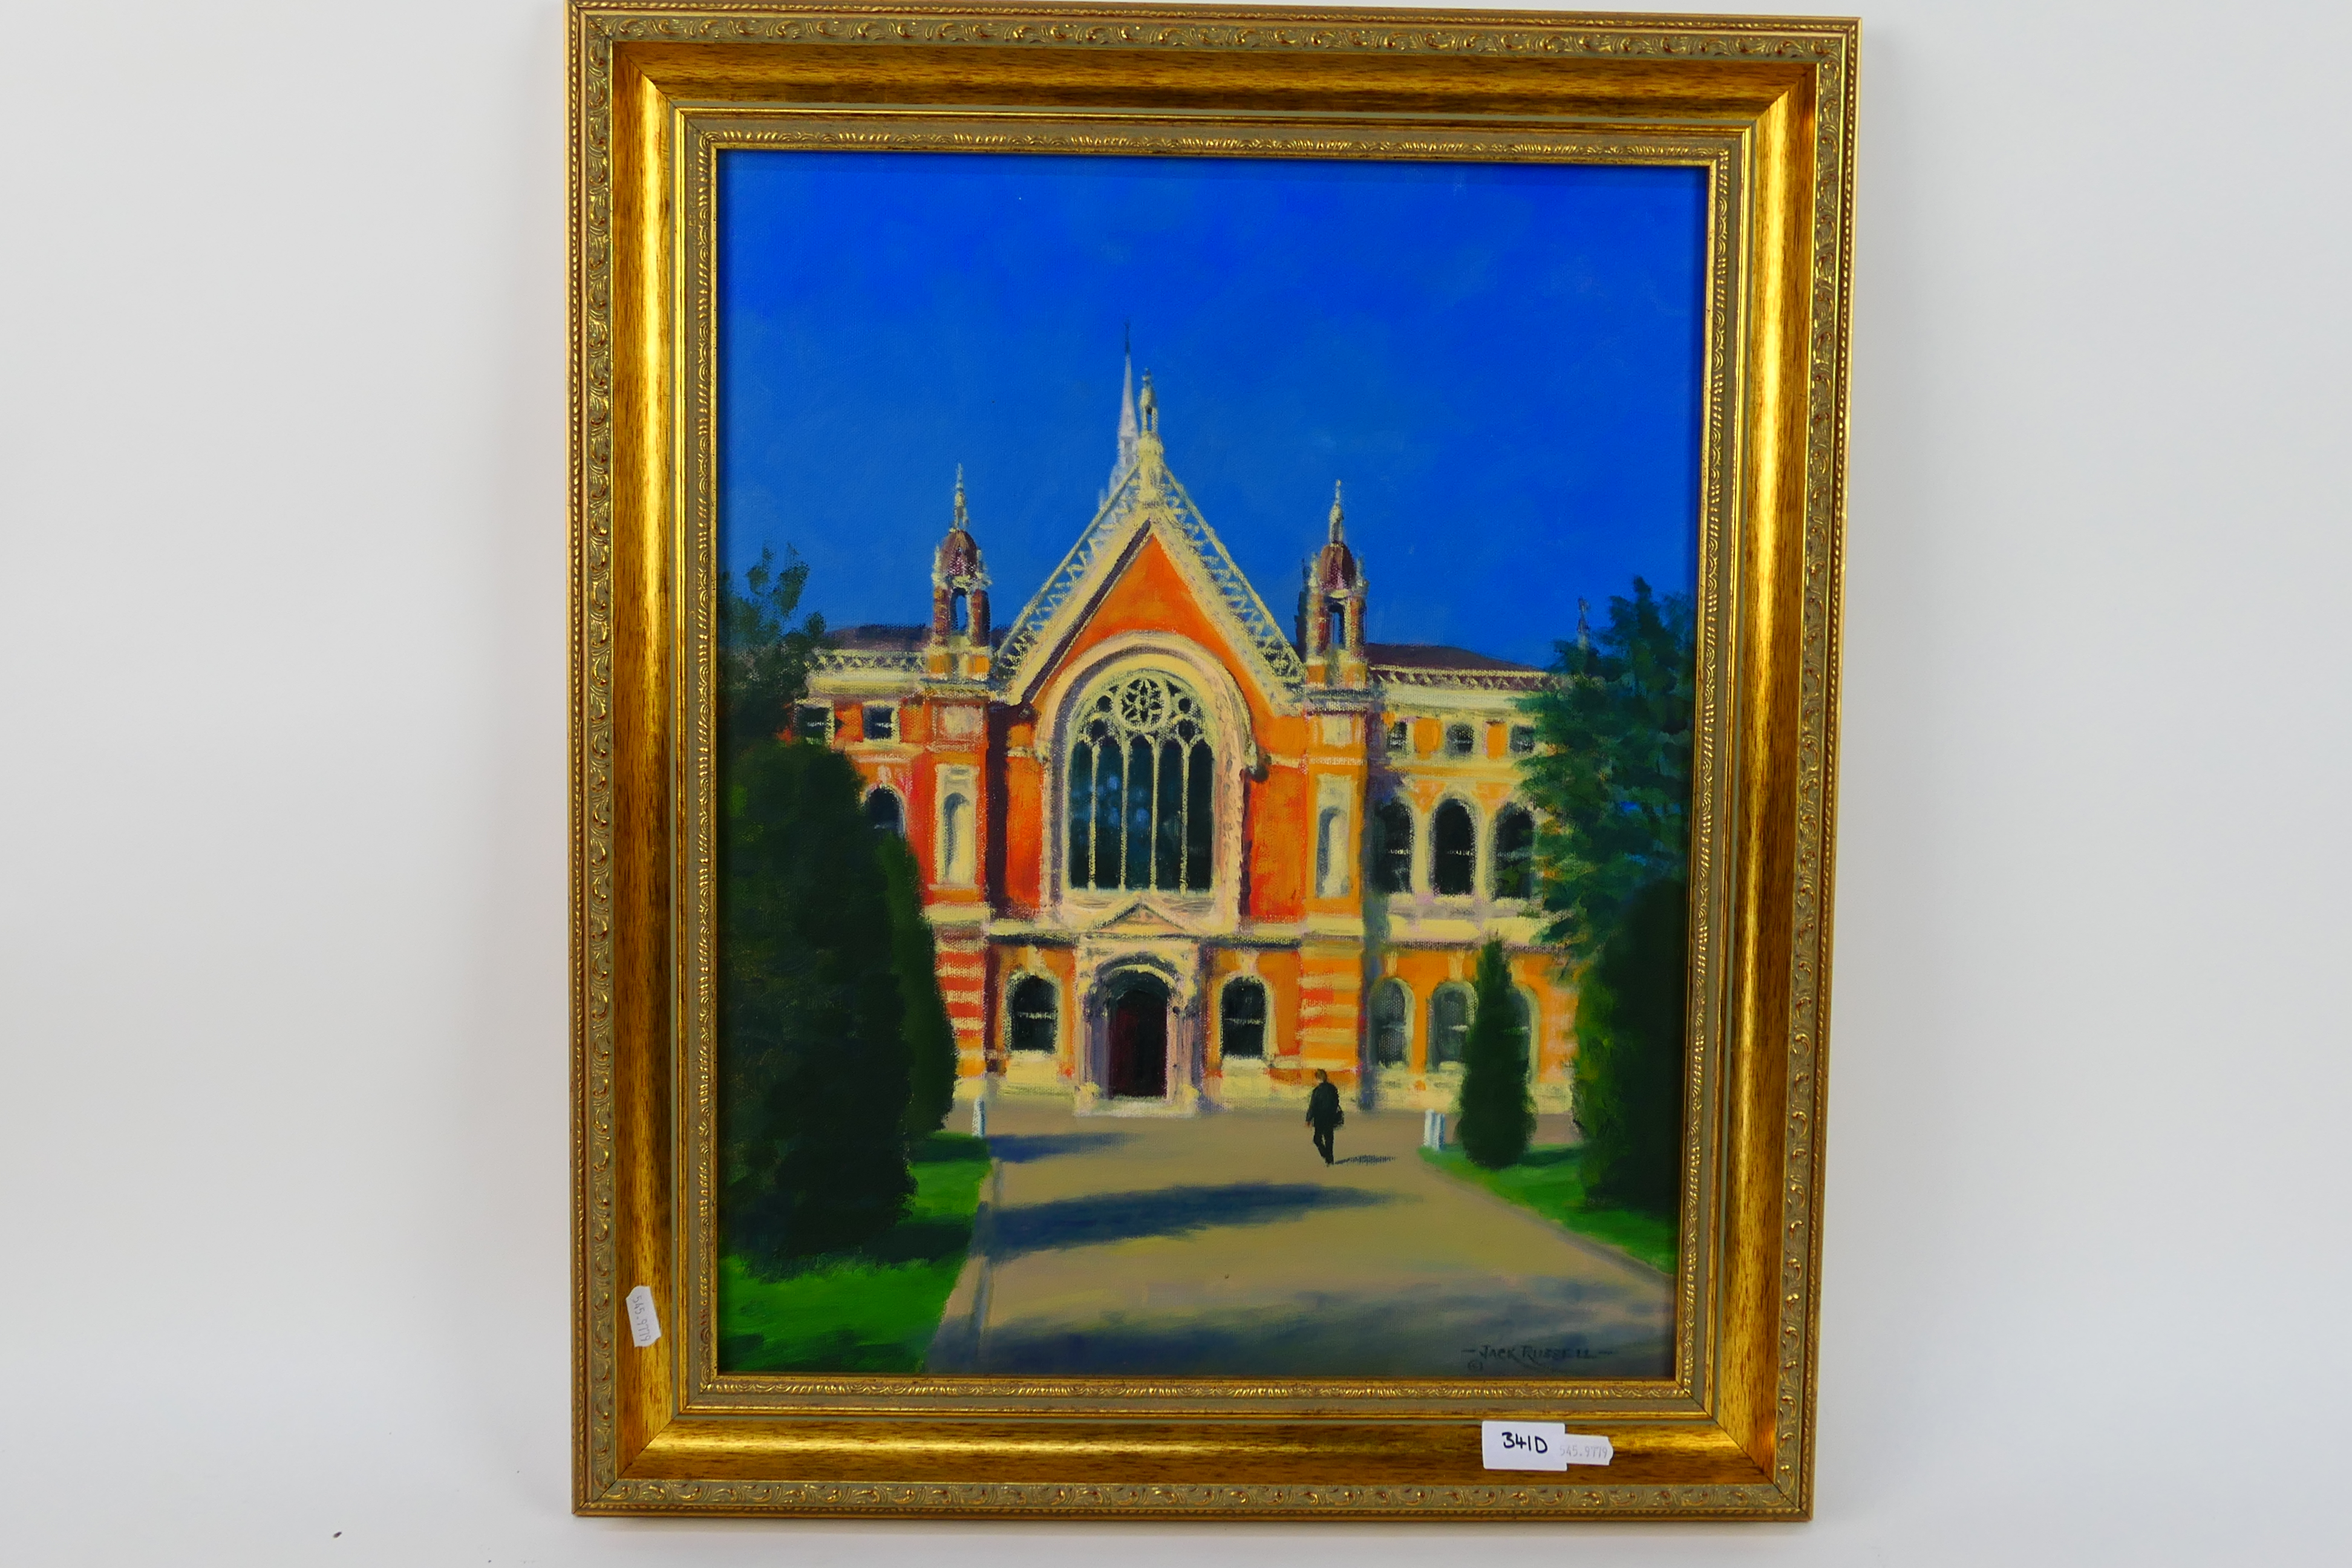 A framed oil on canvas depicting Dulwich College, signed lower right by the artist Jack Russell,